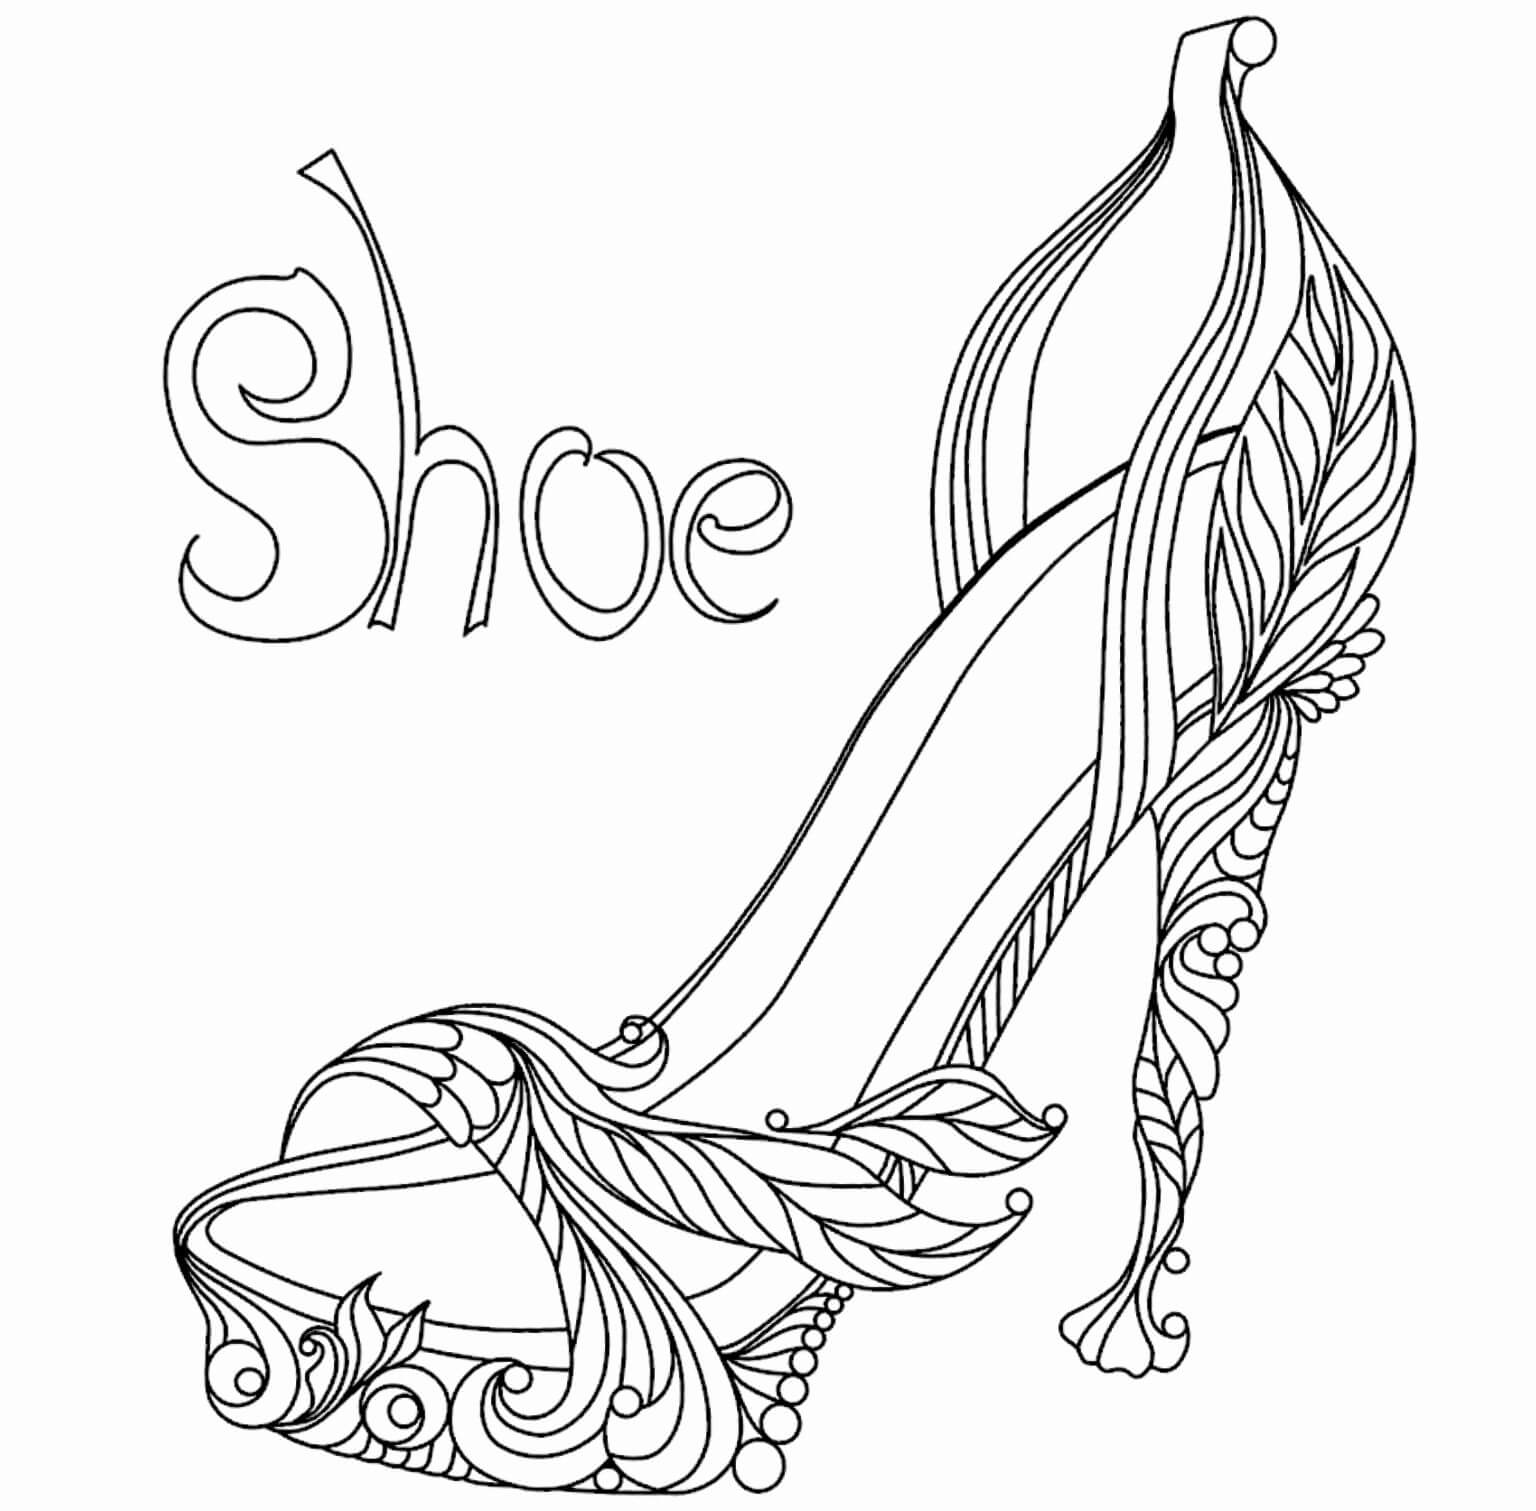 High Heel Drawing Template At Paintingvalley | Explore With Regard To High Heel Template For Cards